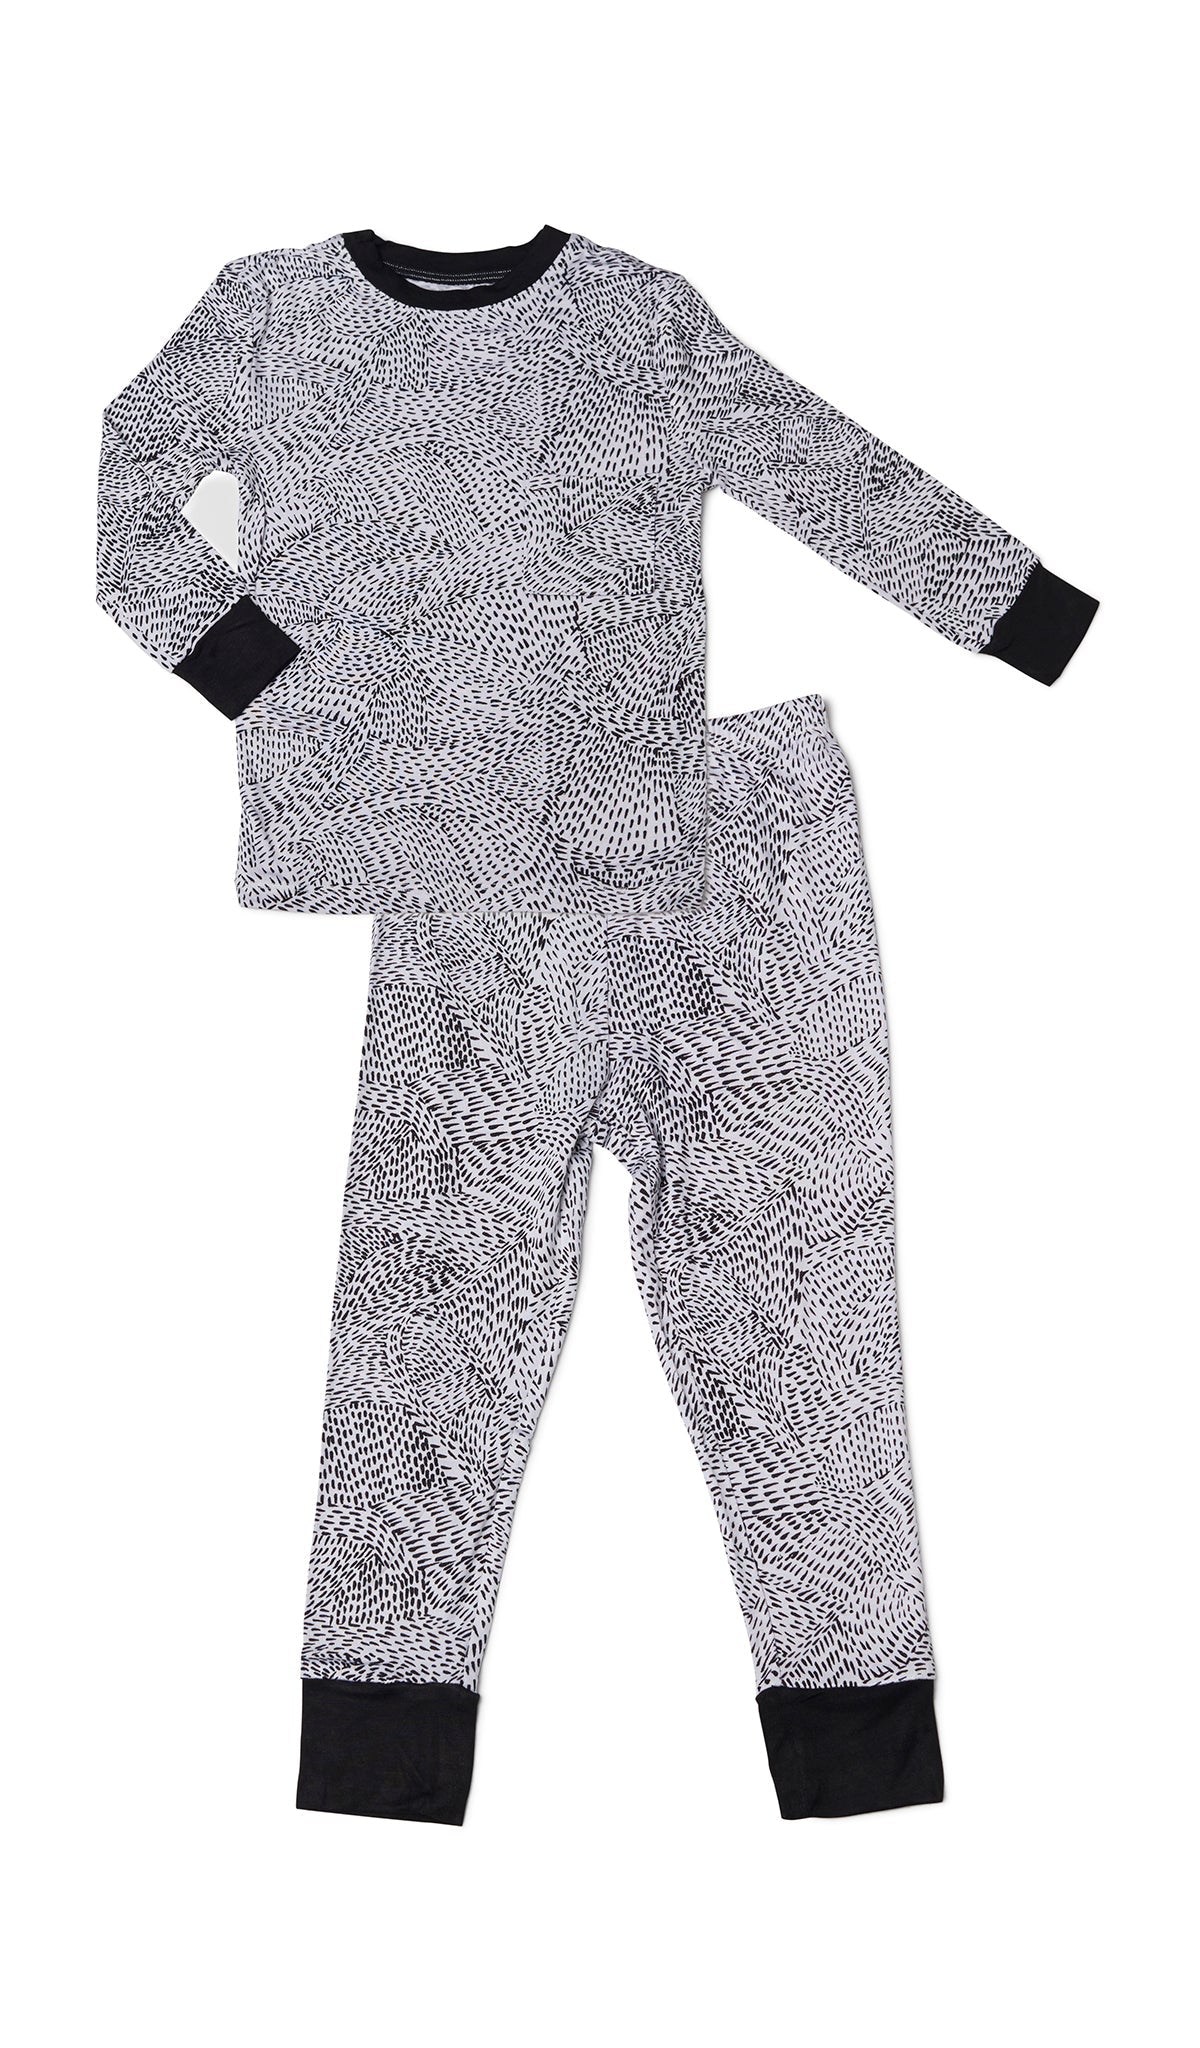 Twilight Emerson Baby 2-Piece Pant PJ. Long sleeve top with cuff trim and long pant with cuff trim.